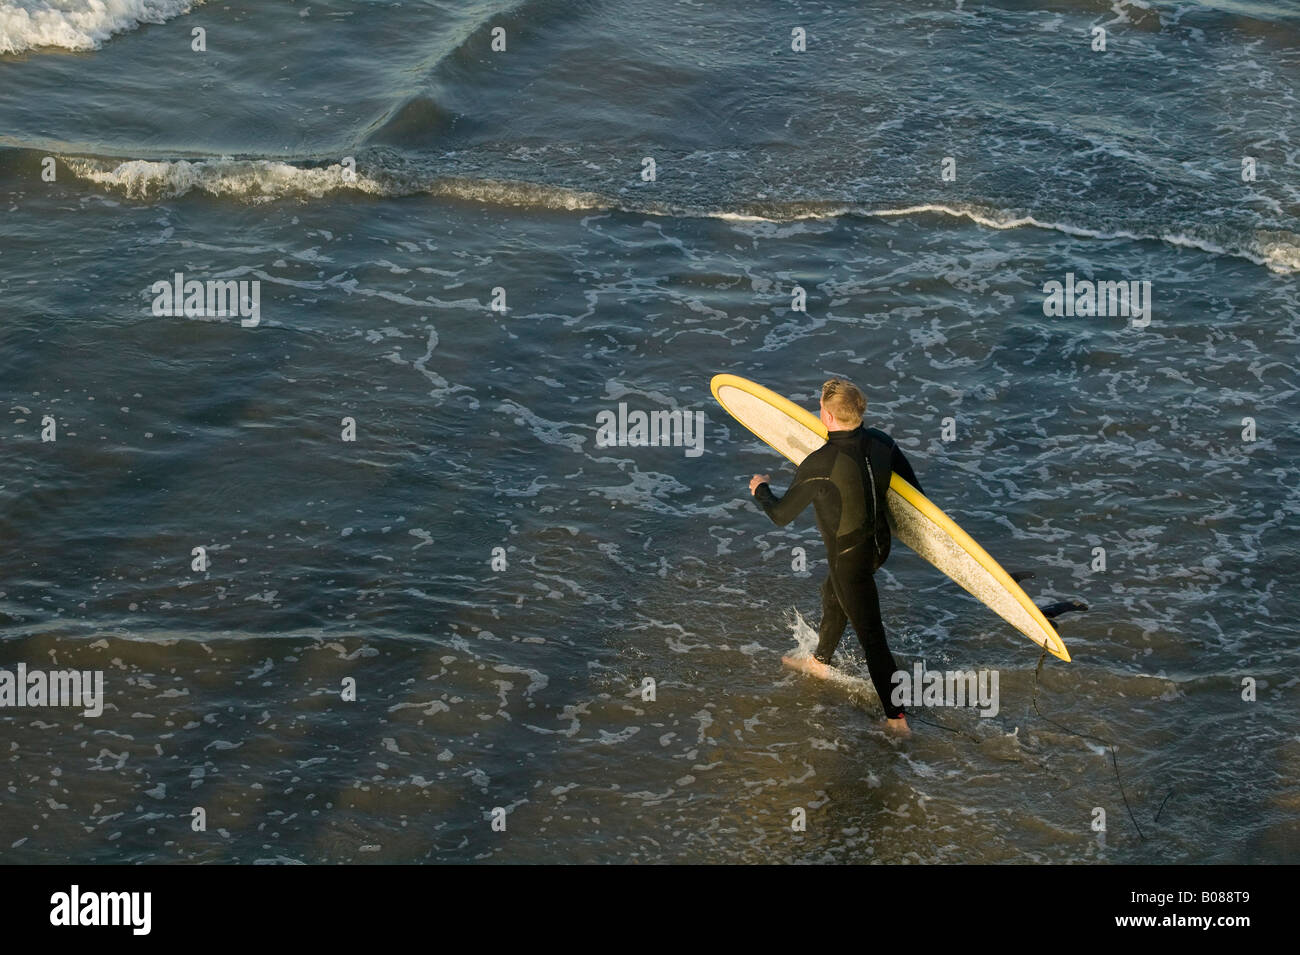 A surfer carries his surfboard into the ocean for a day of surfing. Stock Photo